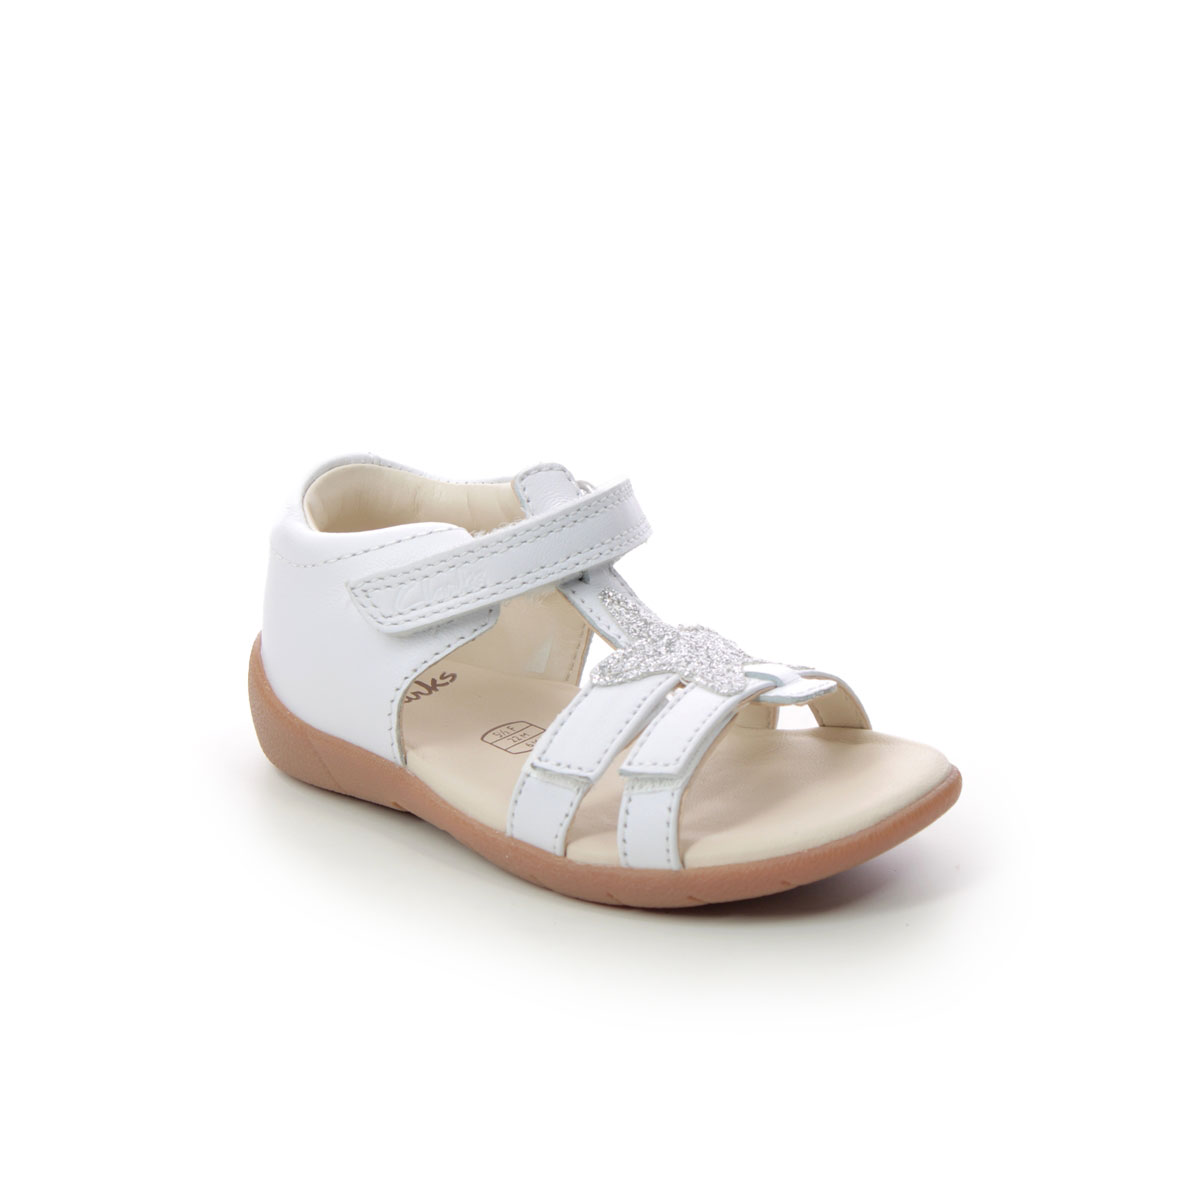 Clarks Zora Summer T WHITE LEATHER Kids sandals 5664-36F in a Plain Leather in Size 4.5